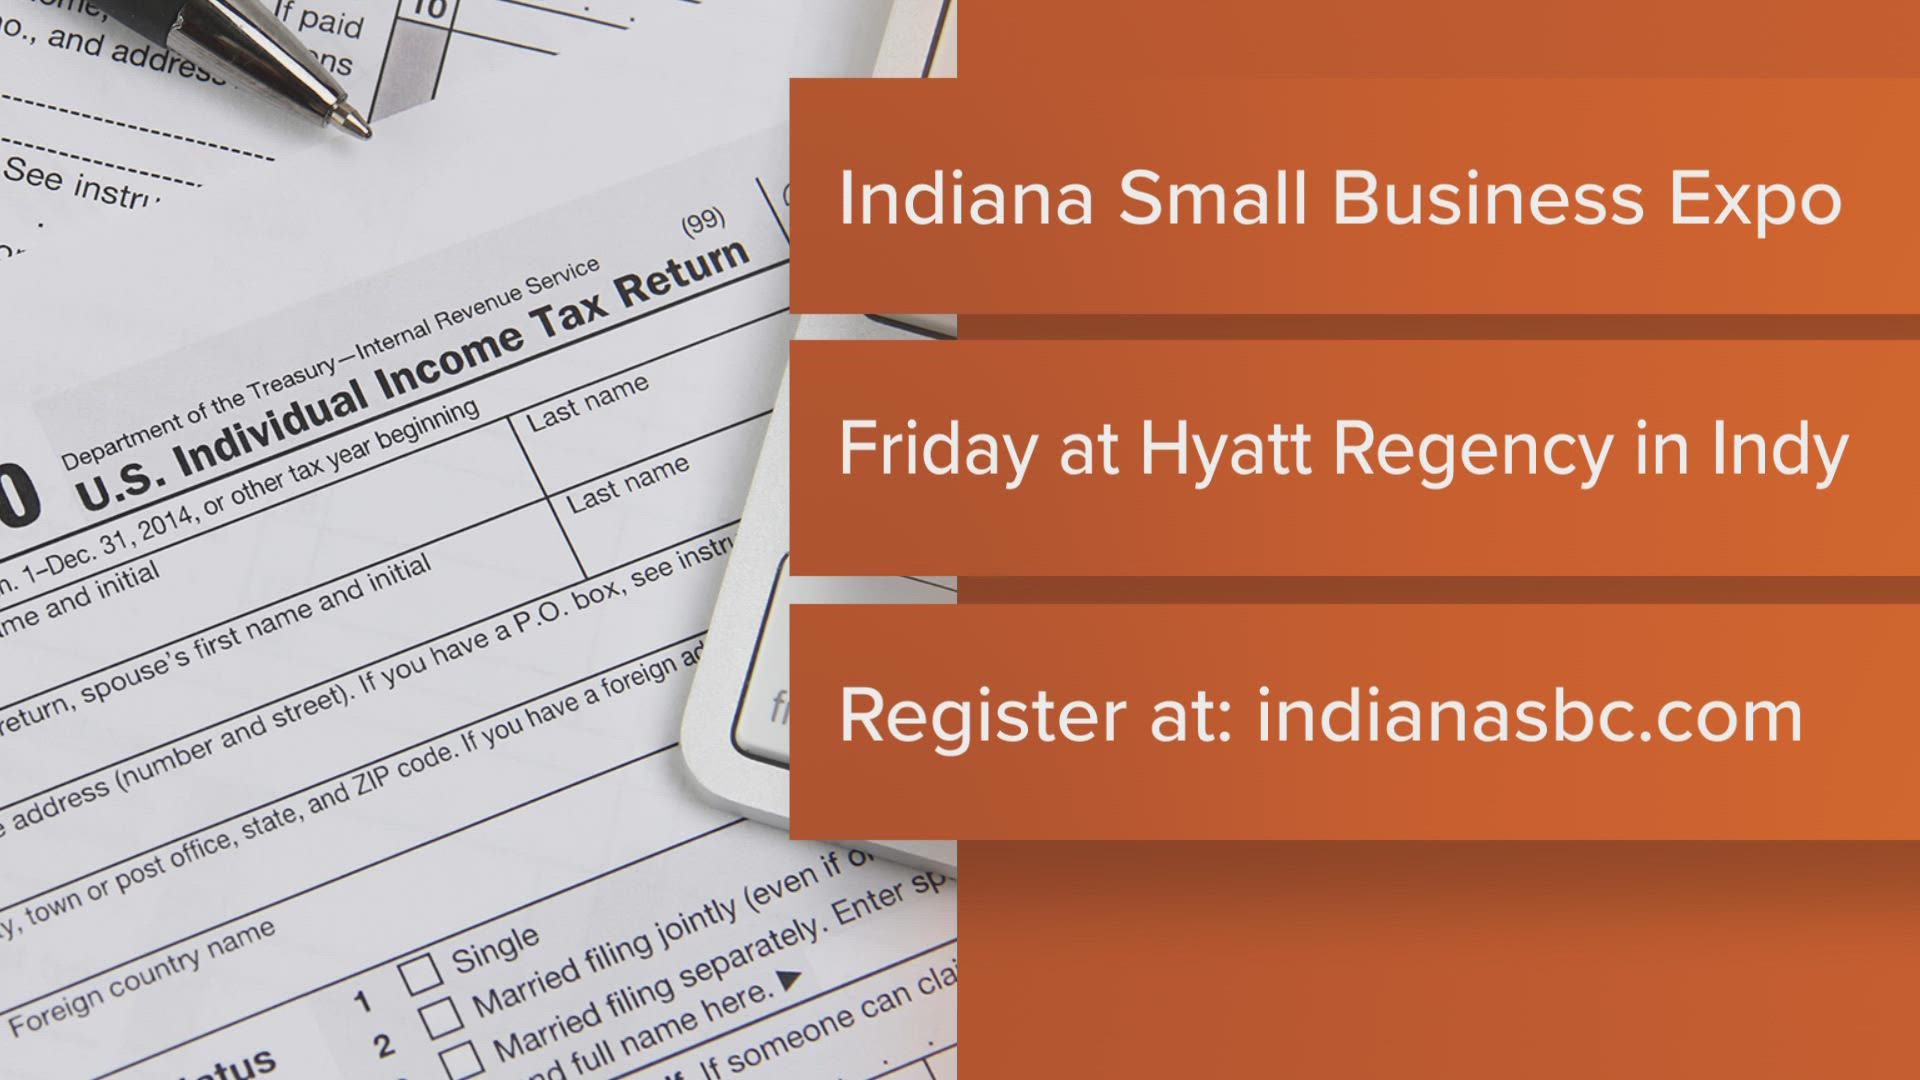 Dozens of workshops and panels are planned to connect entrepreneurs from all over Indiana.